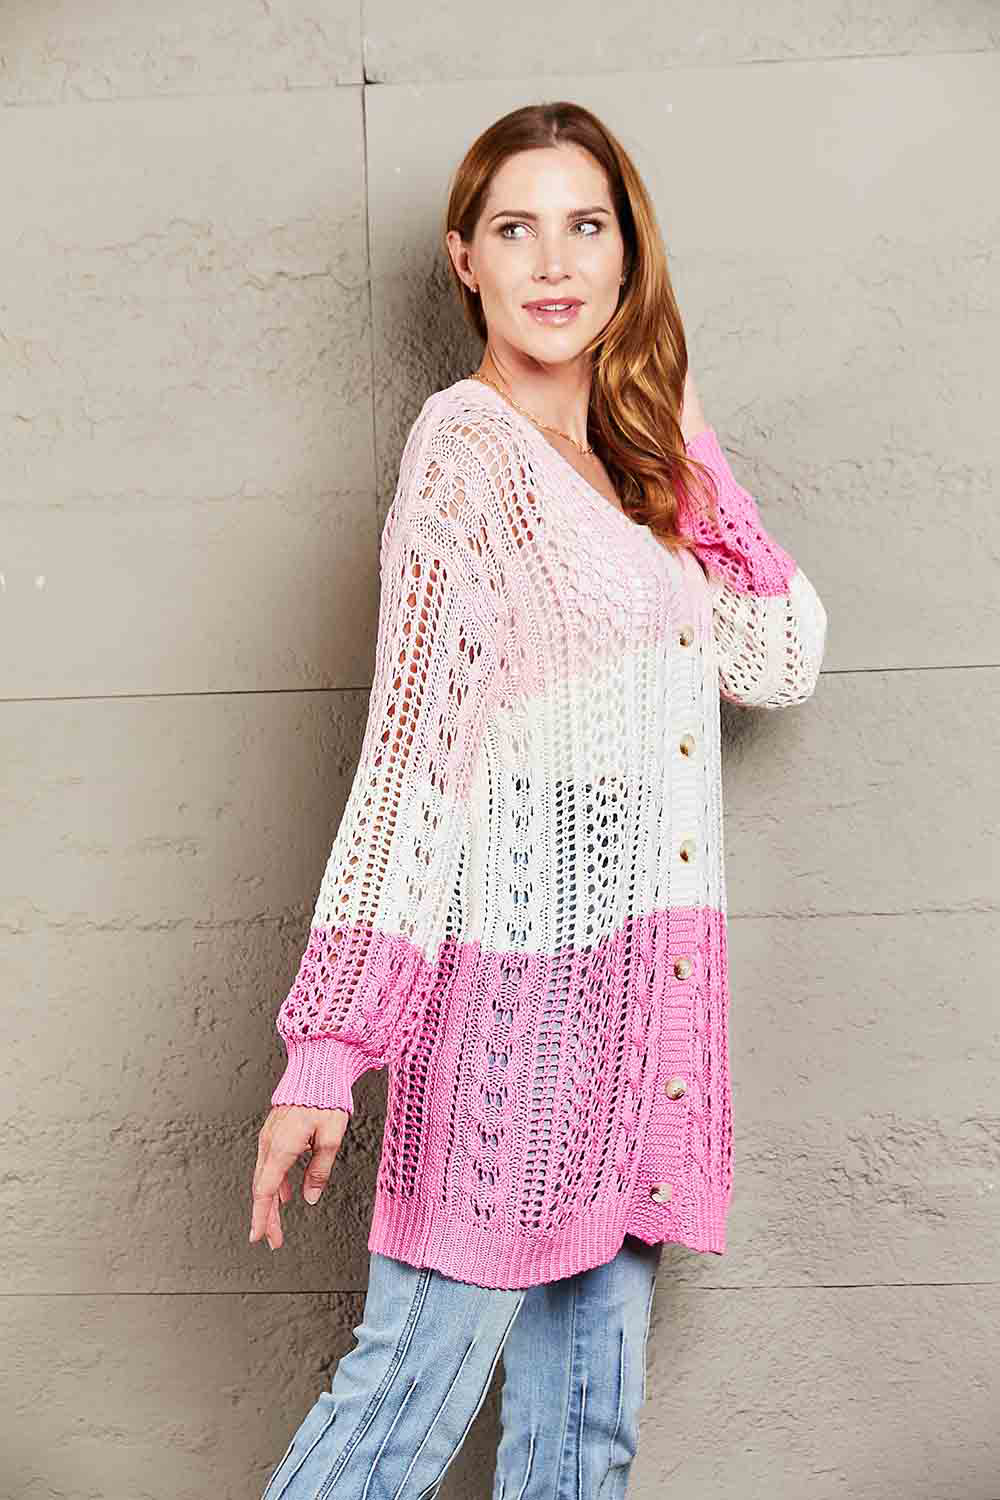 Openwork Ribbed Cuff Longline Cardigan - Women’s Clothing & Accessories - Shirts & Tops - 4 - 2024